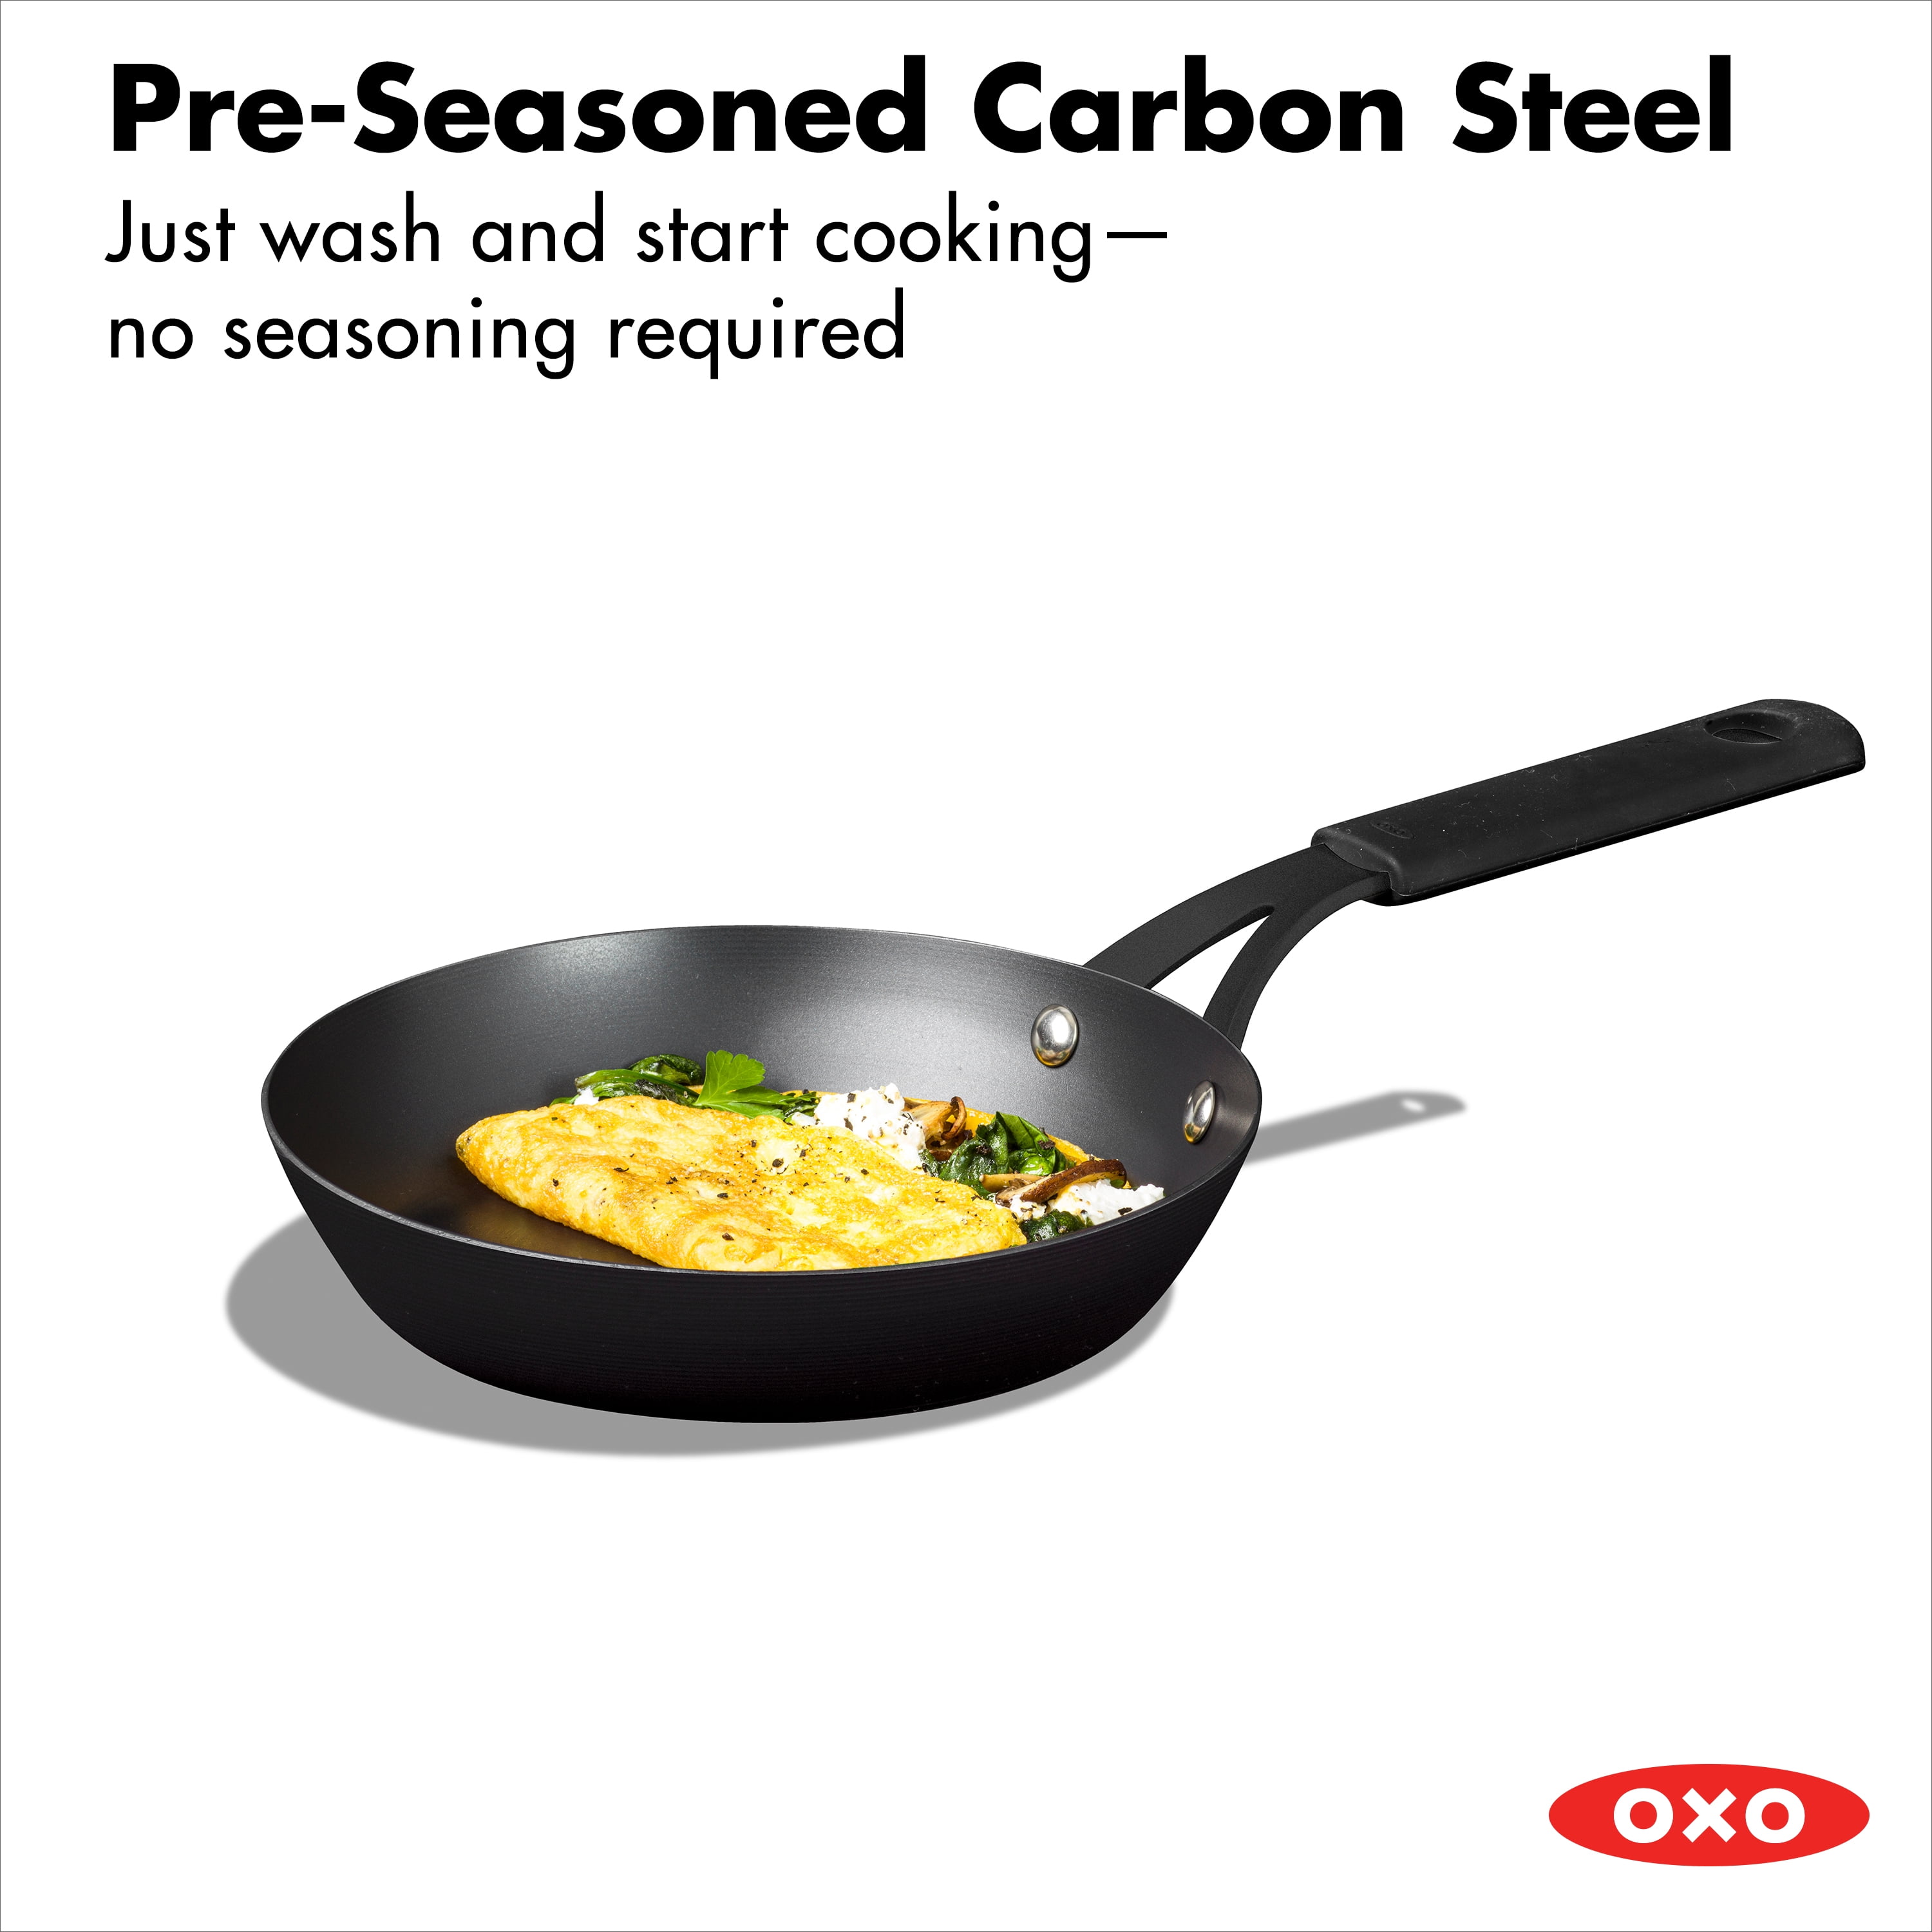  OXO Obsidian Pre-Seasoned Carbon Steel, 10 Frying Pan Skillet  with Removable Silicone Handle Holder, Induction, Oven Safe, Black: Home &  Kitchen